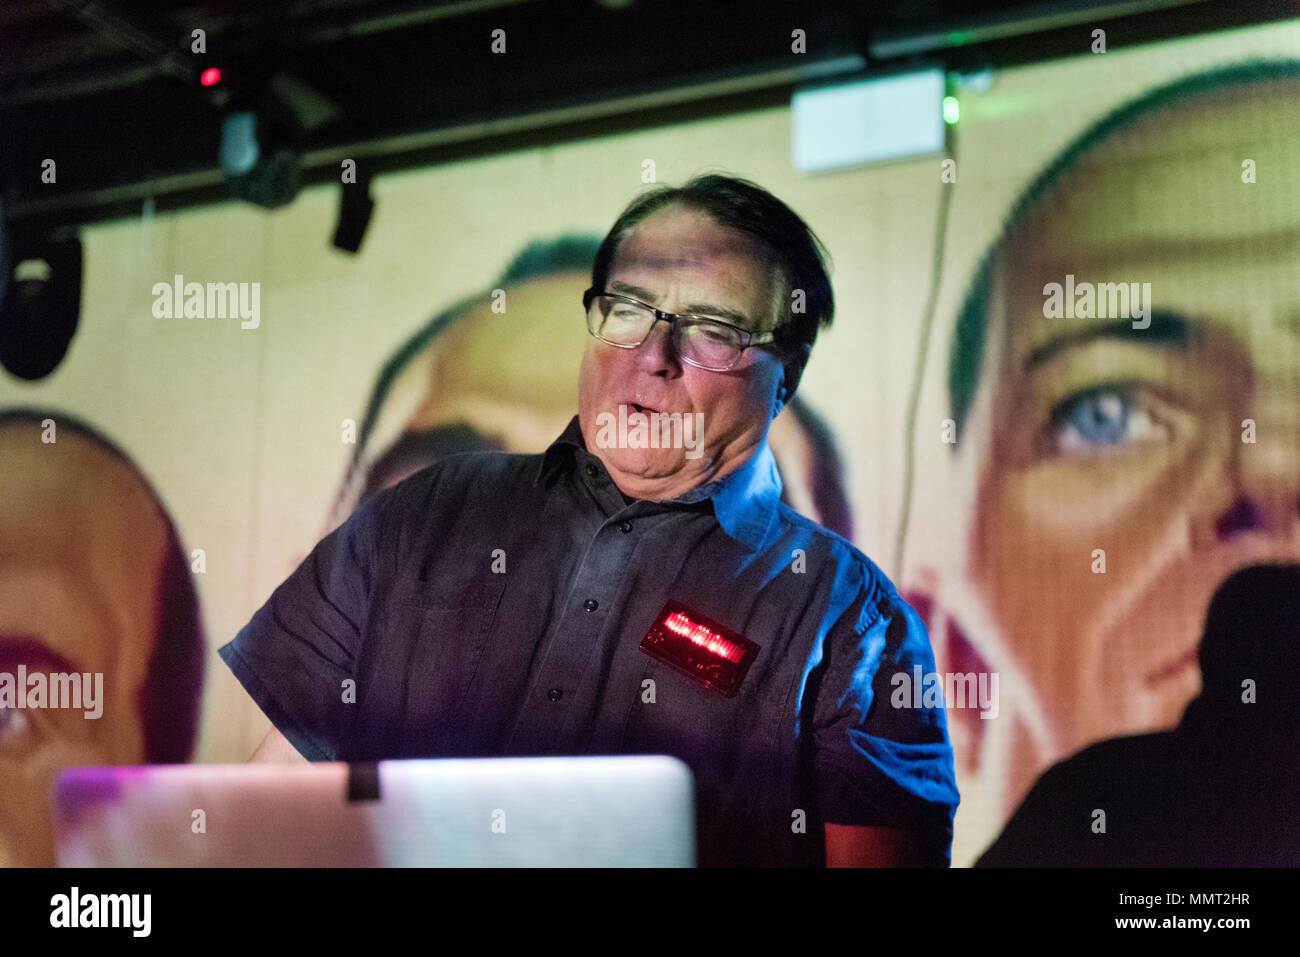 Leeds, UK. 12th May 2018. Wolfgang Flur, former member of German electronic band Kraftwerk performs a set at the Brudenell Social Club, Leeds, UK. In the background are projected images of Kraftwerk members. Credit: John Bentley/Alamy Live News Stock Photo